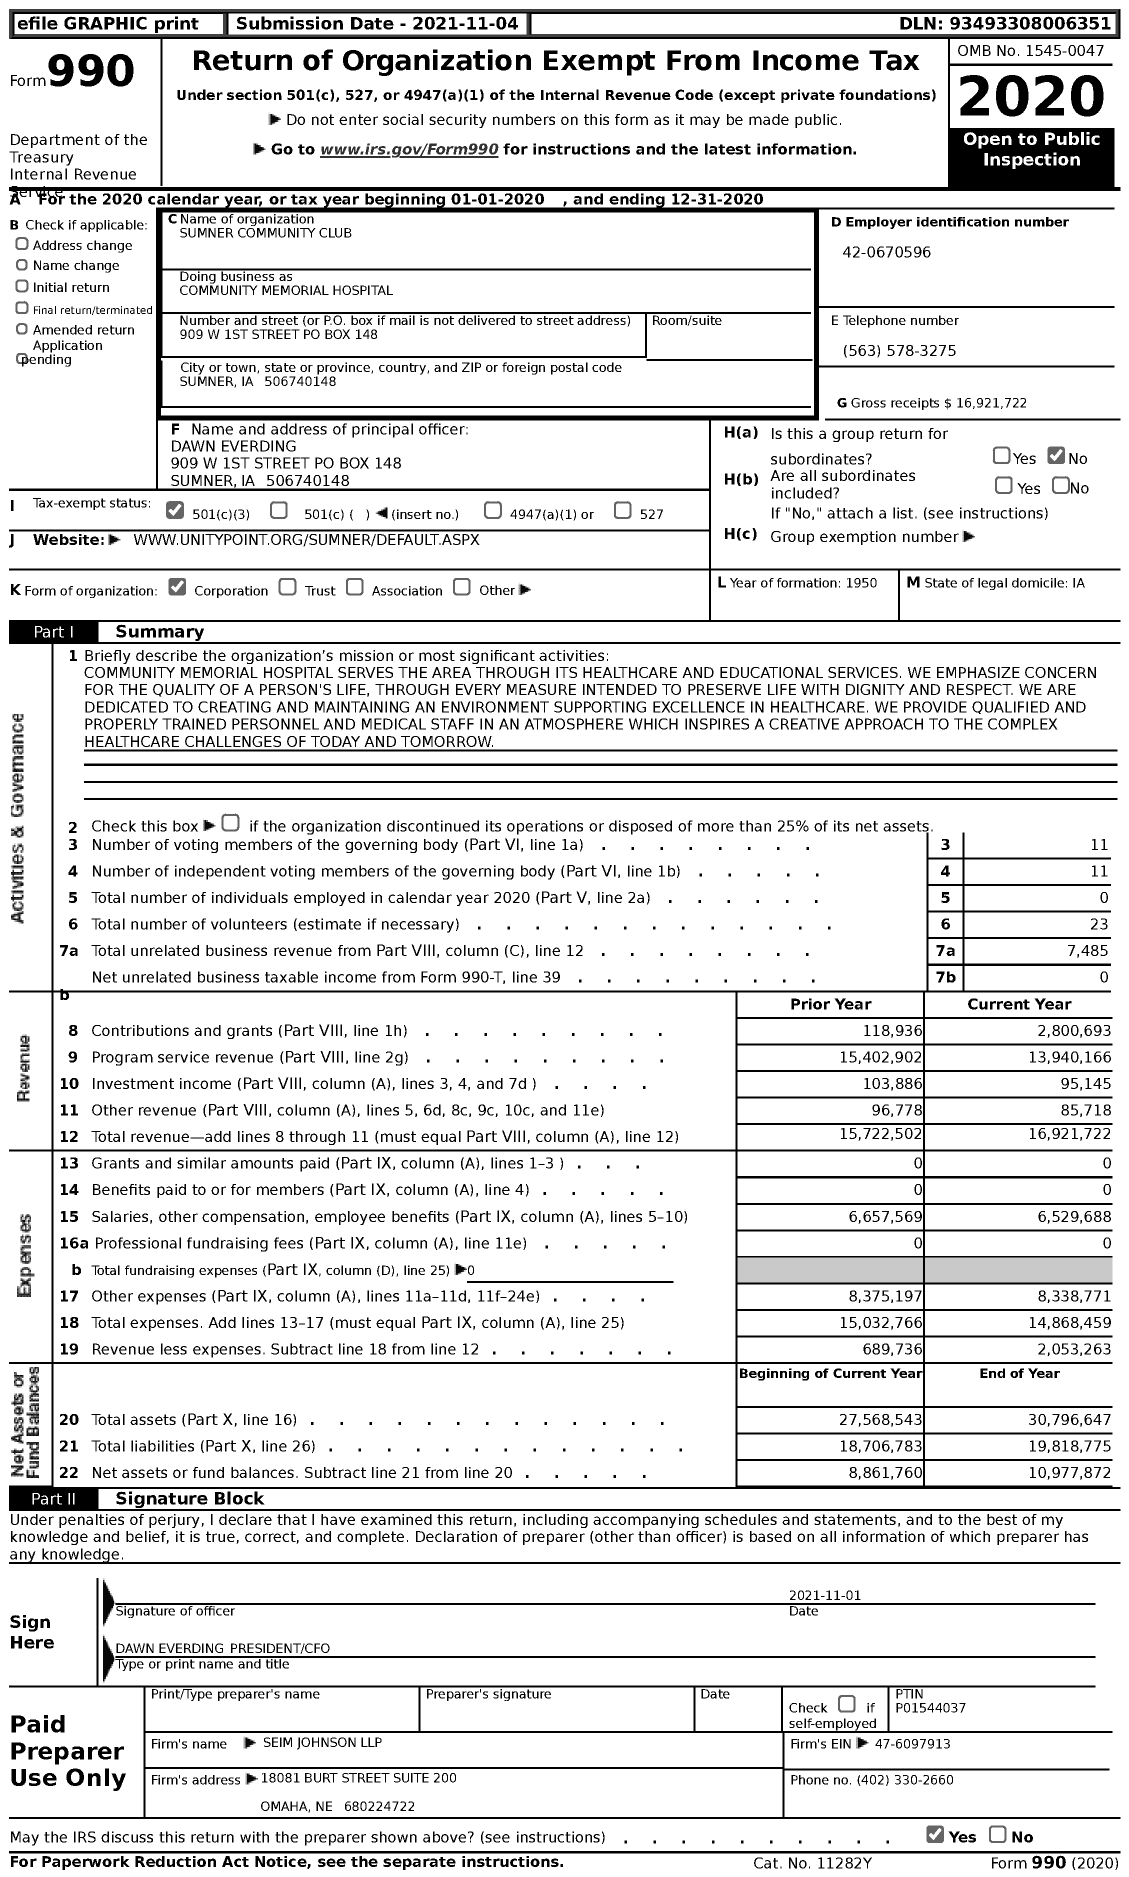 Image of first page of 2020 Form 990 for Community Memorial Hospital / Sumner Community Club (CMH)